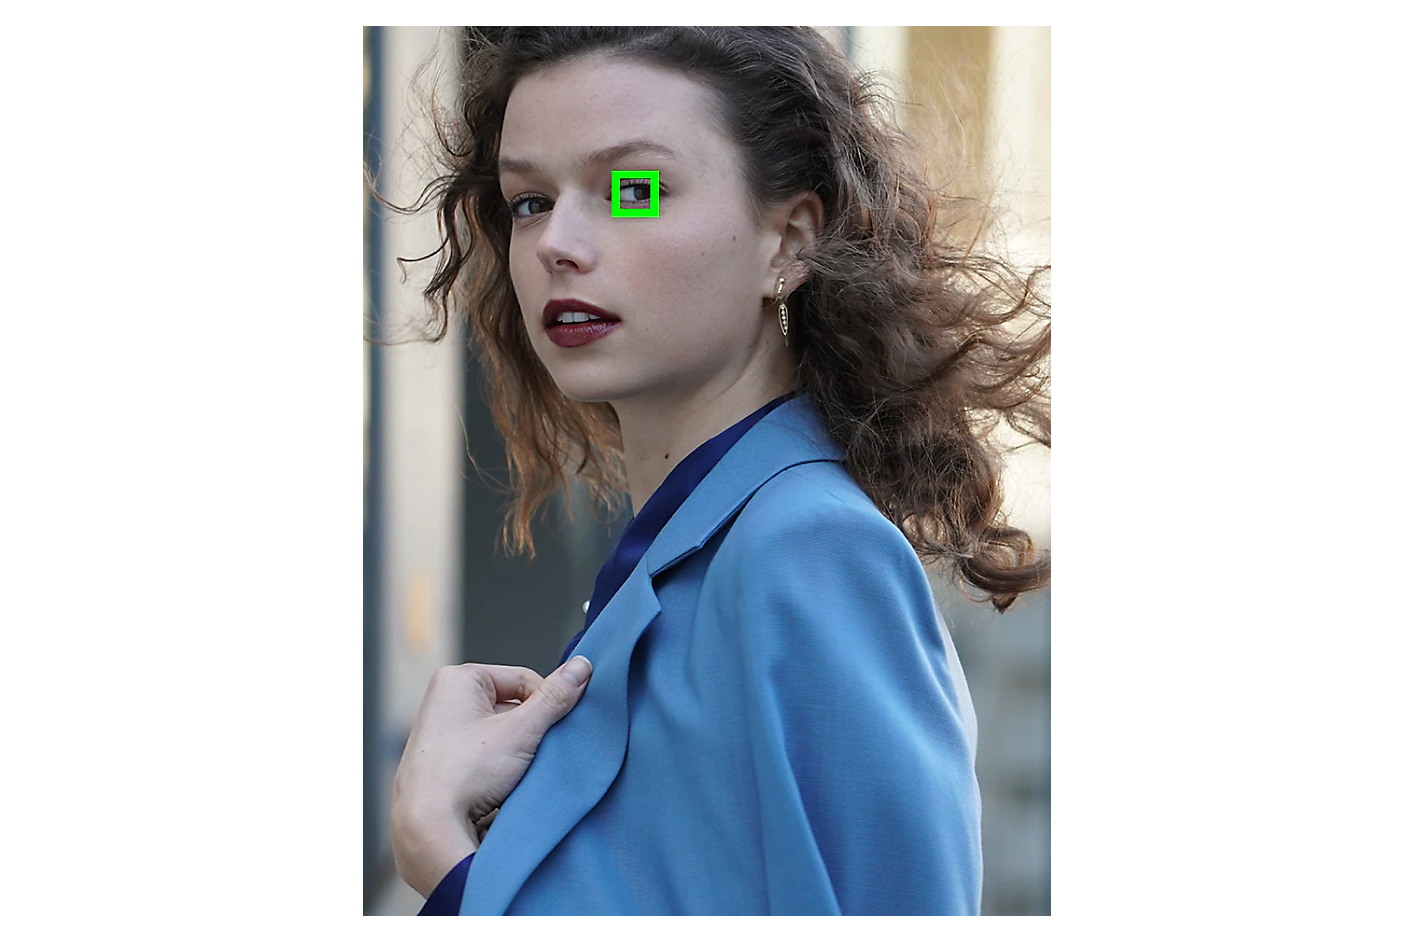 A woman in a blue jacket looks to the side with a green square framing one eye.